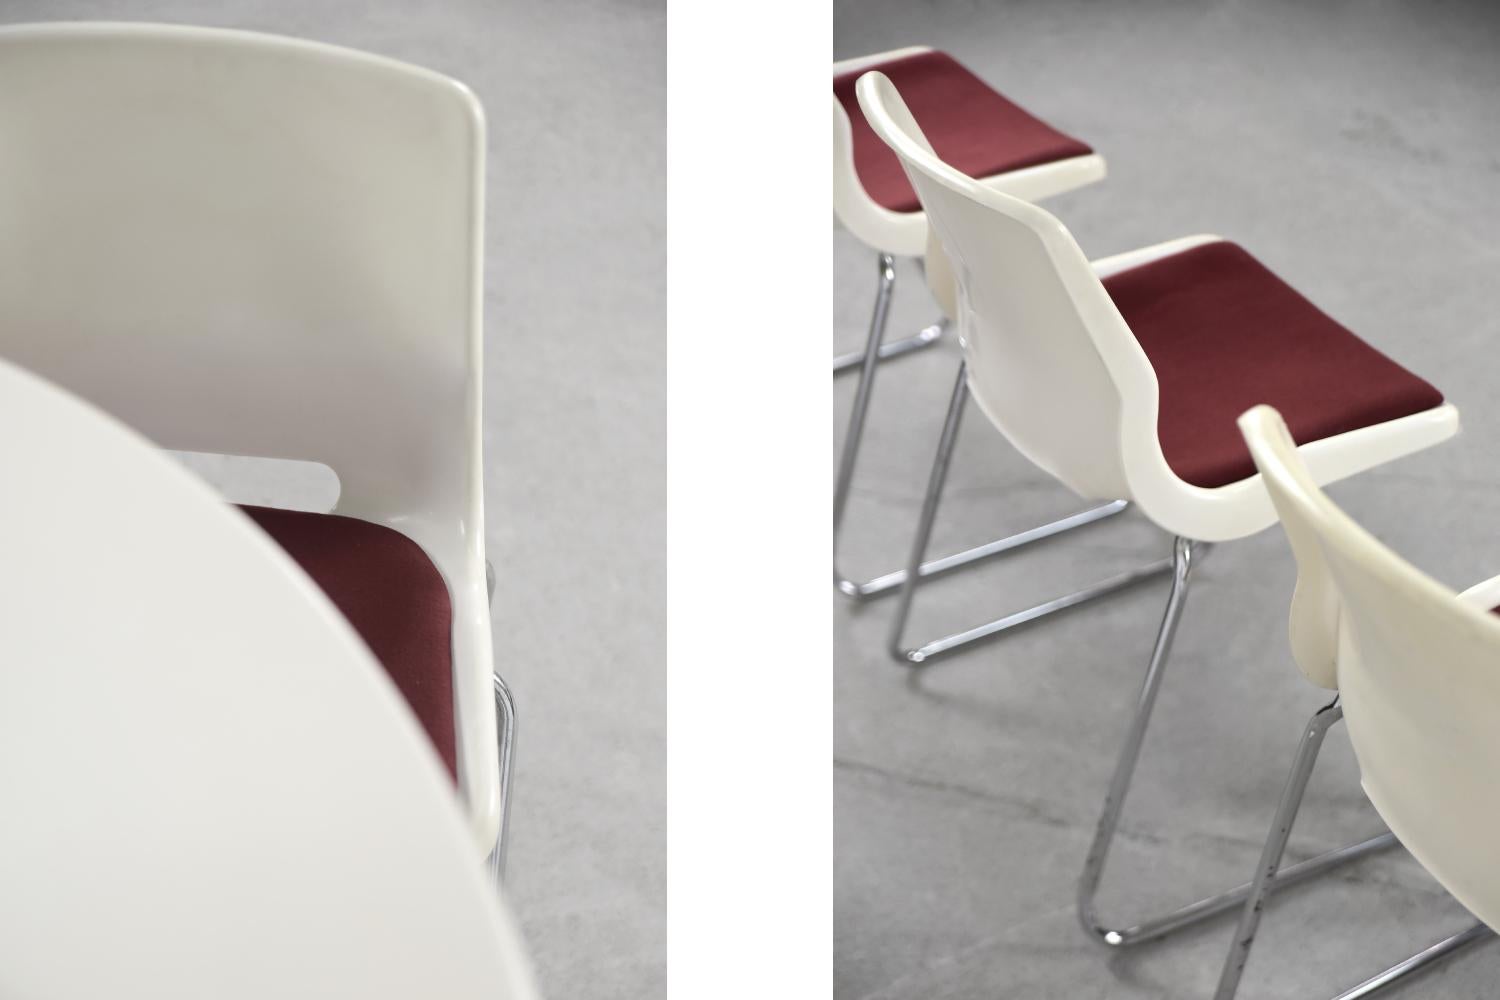 Set of 5 Vintage Mid-Century Modern Scandinavian Plastic & Fabric Chairs, 1970s For Sale 4